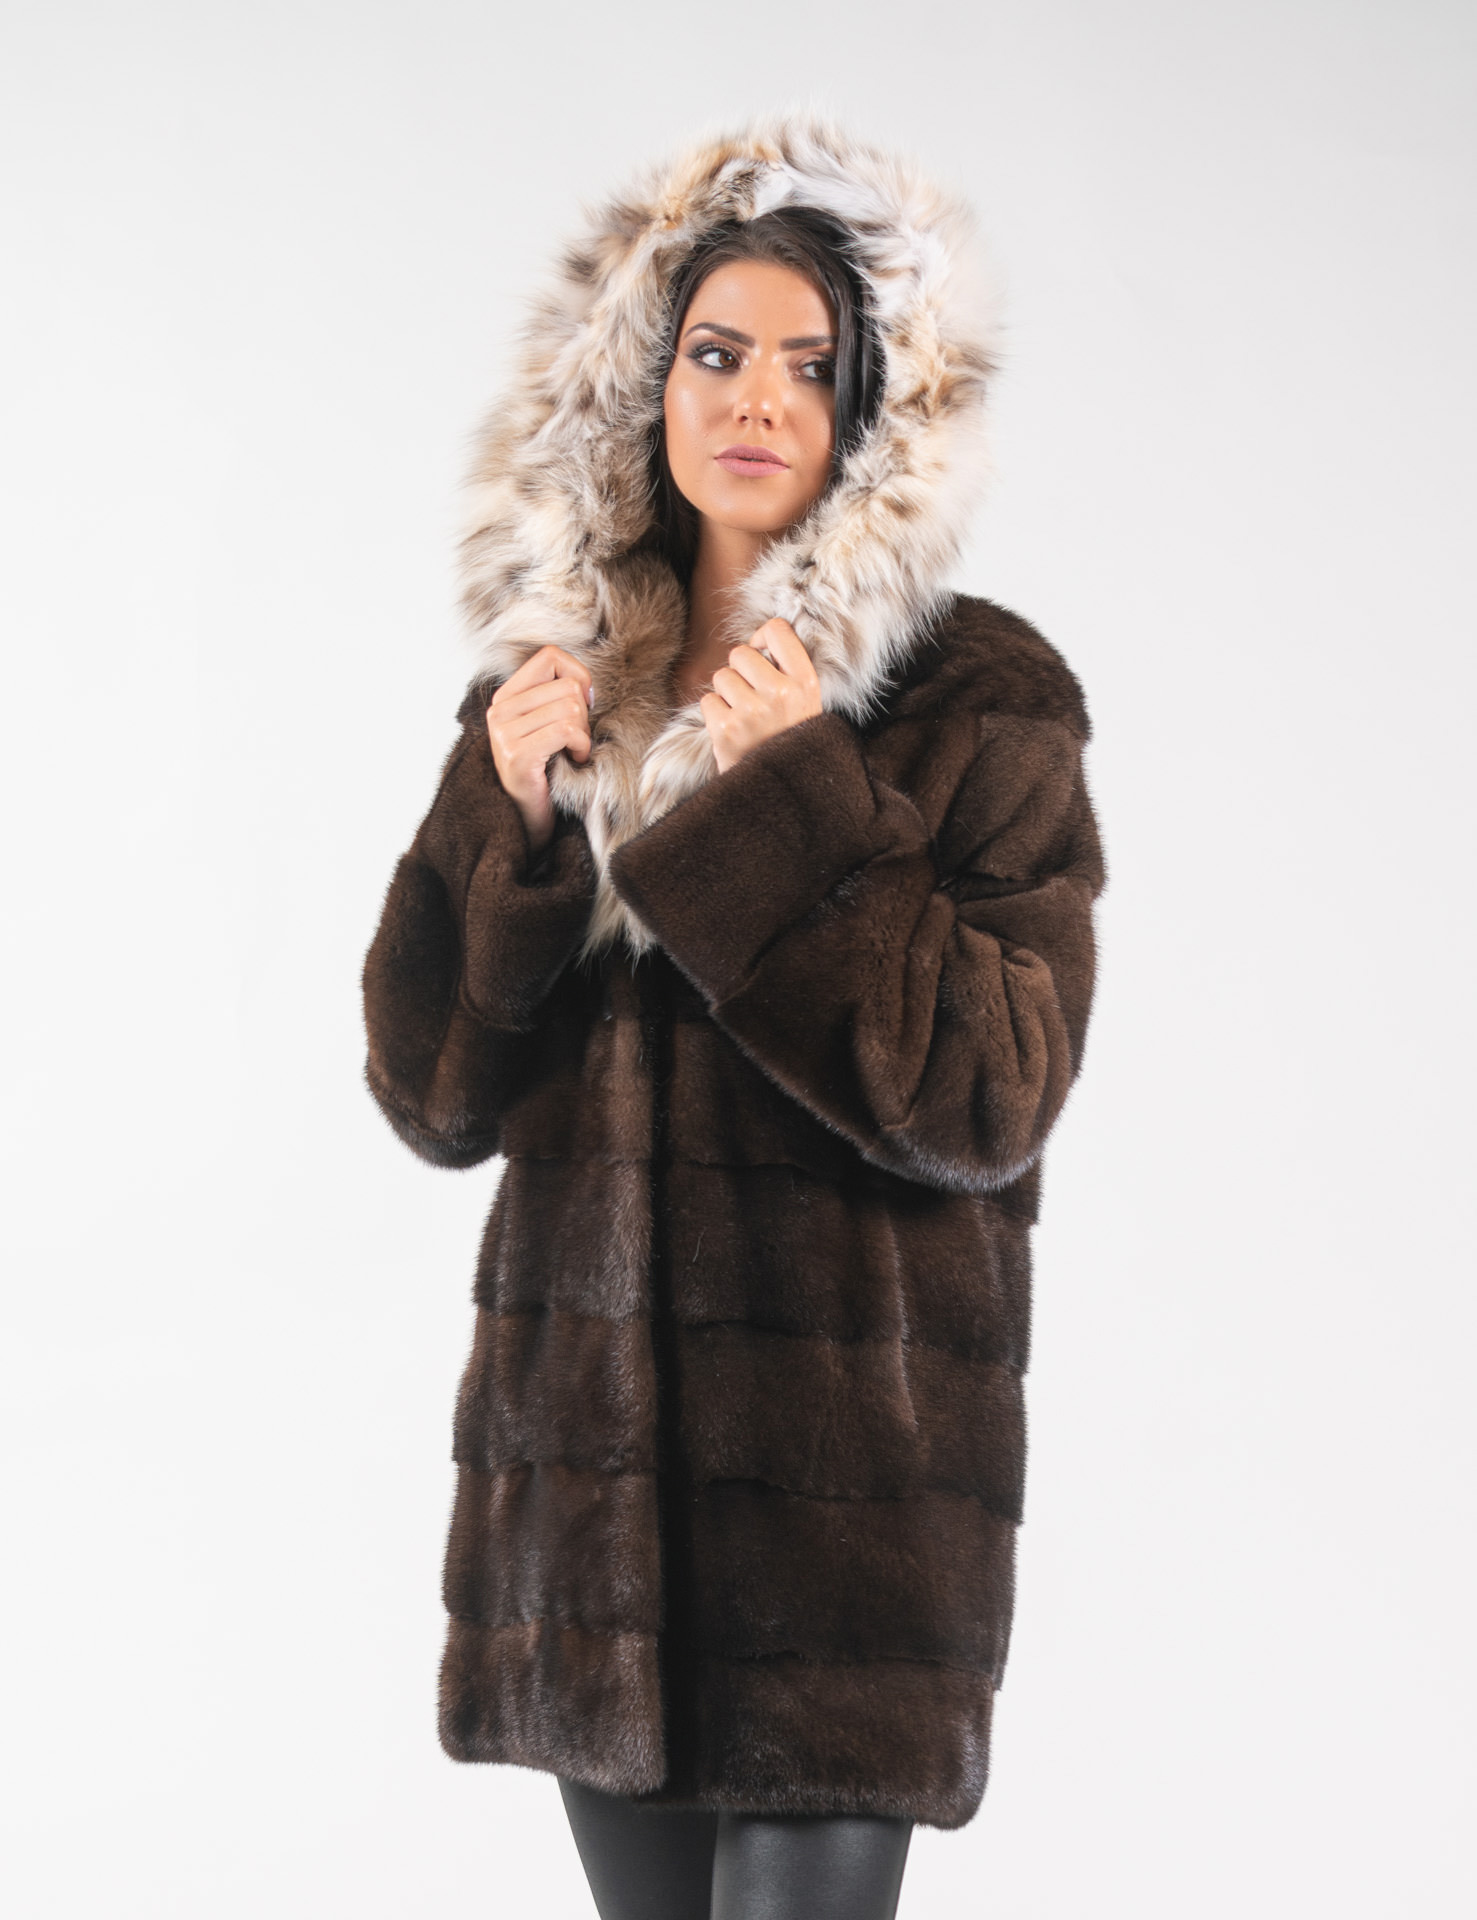 Full skin pink real mink fur jacket with hood and detachable sleeves.  Modern multiwearable winter fur jacket - PAPEL FURS